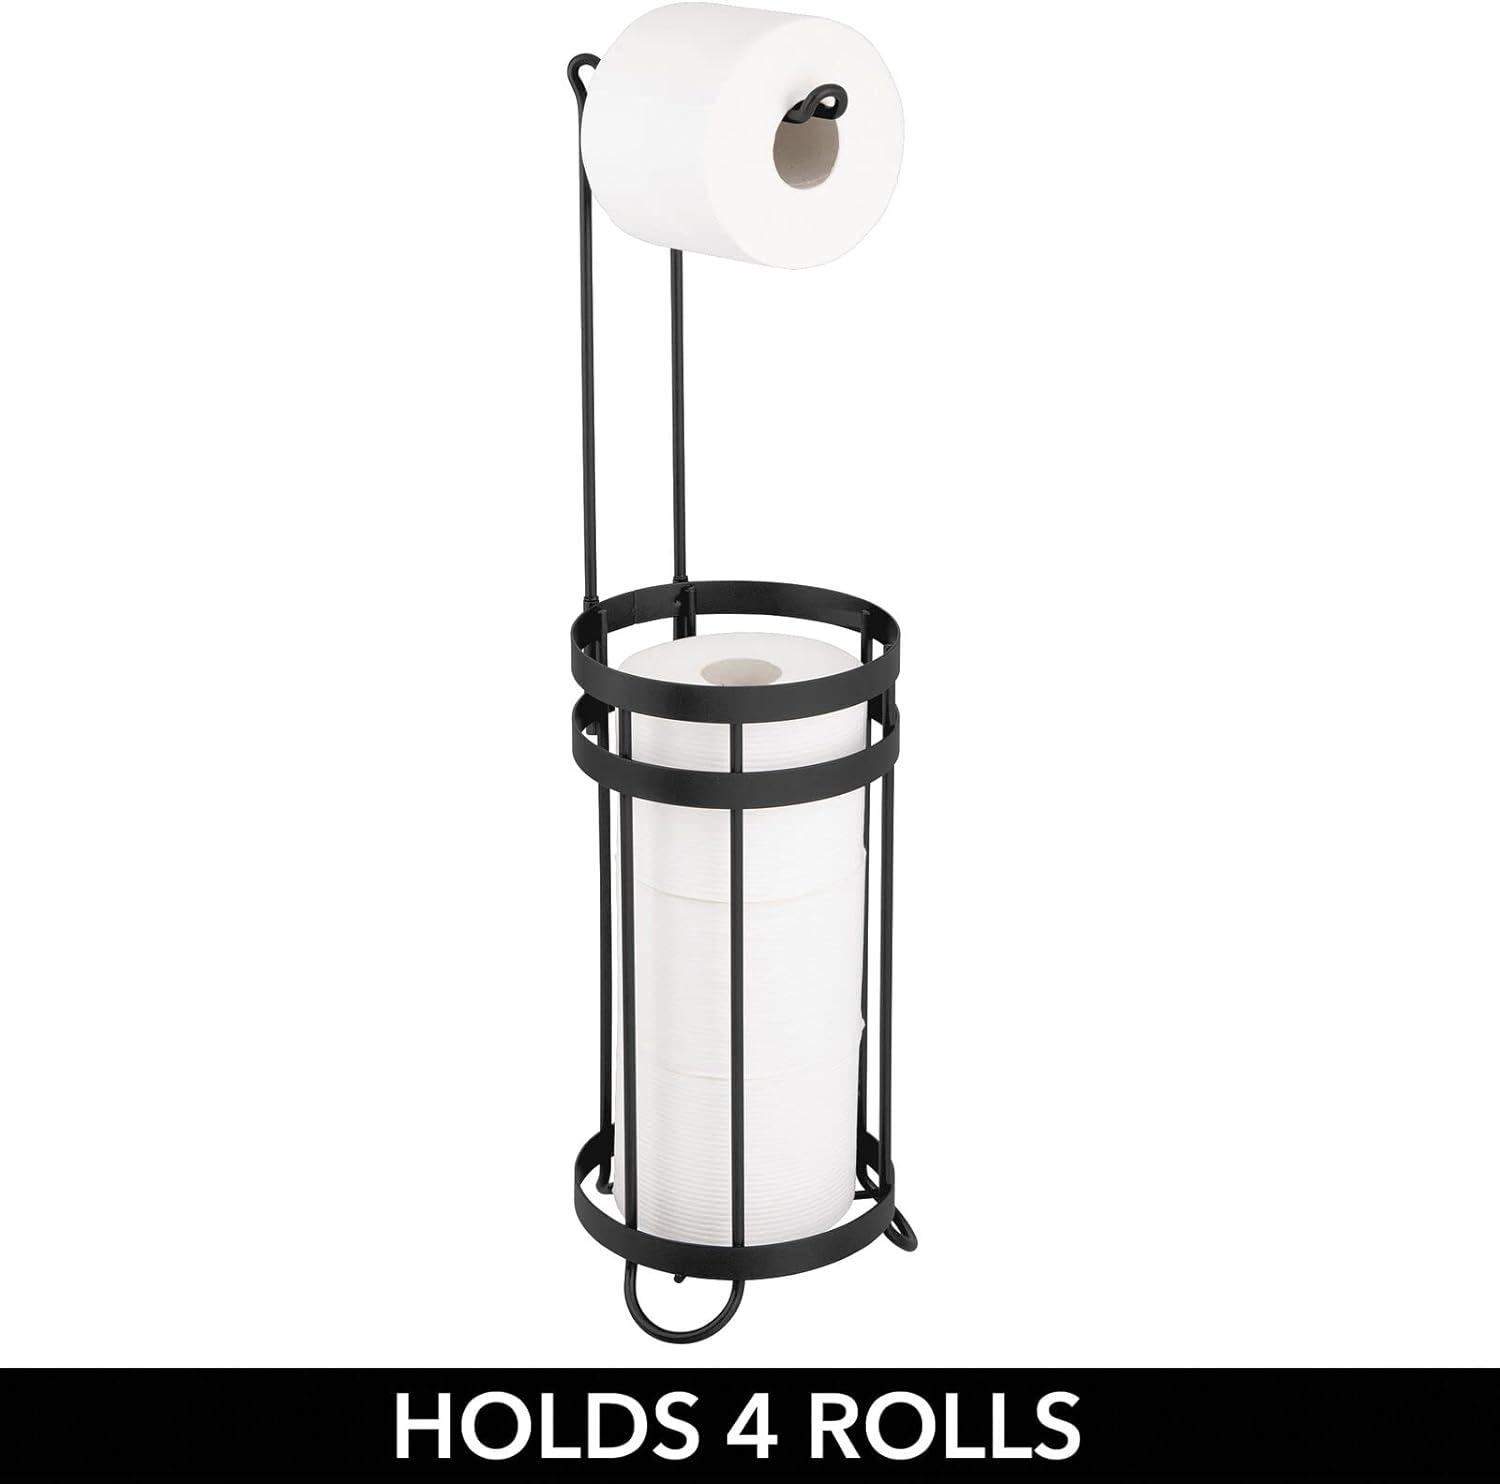 mDesign Metal Free Standing Toilet Paper Stand, Holds 3 Rolls - Black